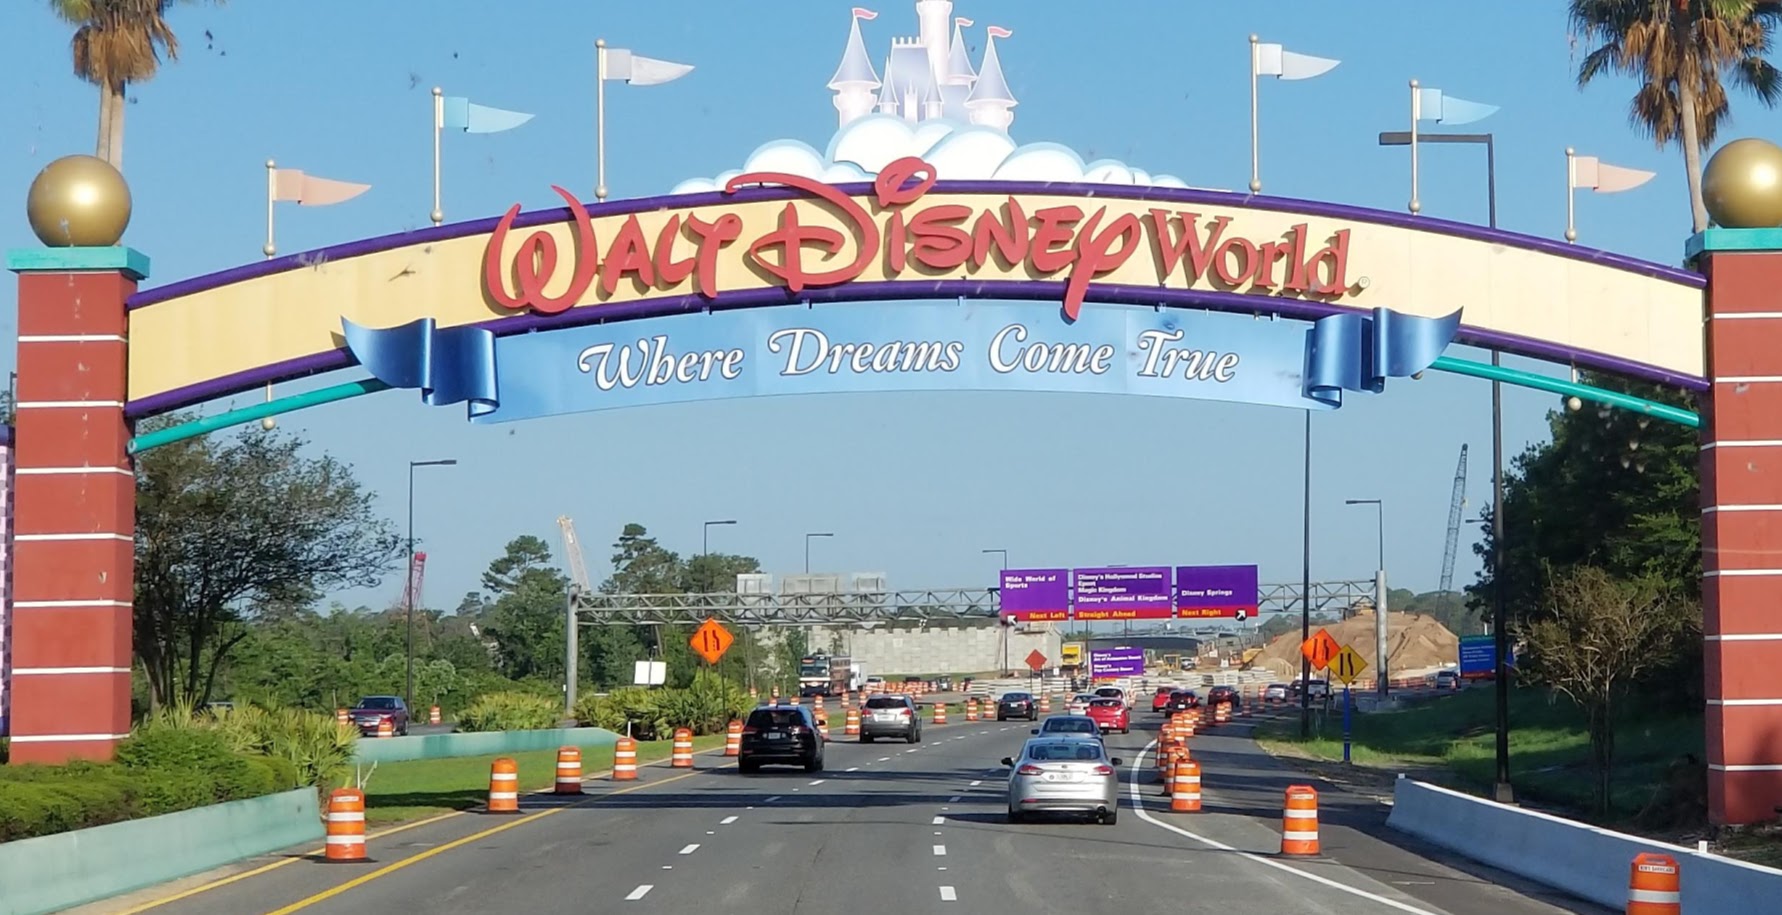 Youtuber under investigation for sneaking into Disney World & Universal Studios